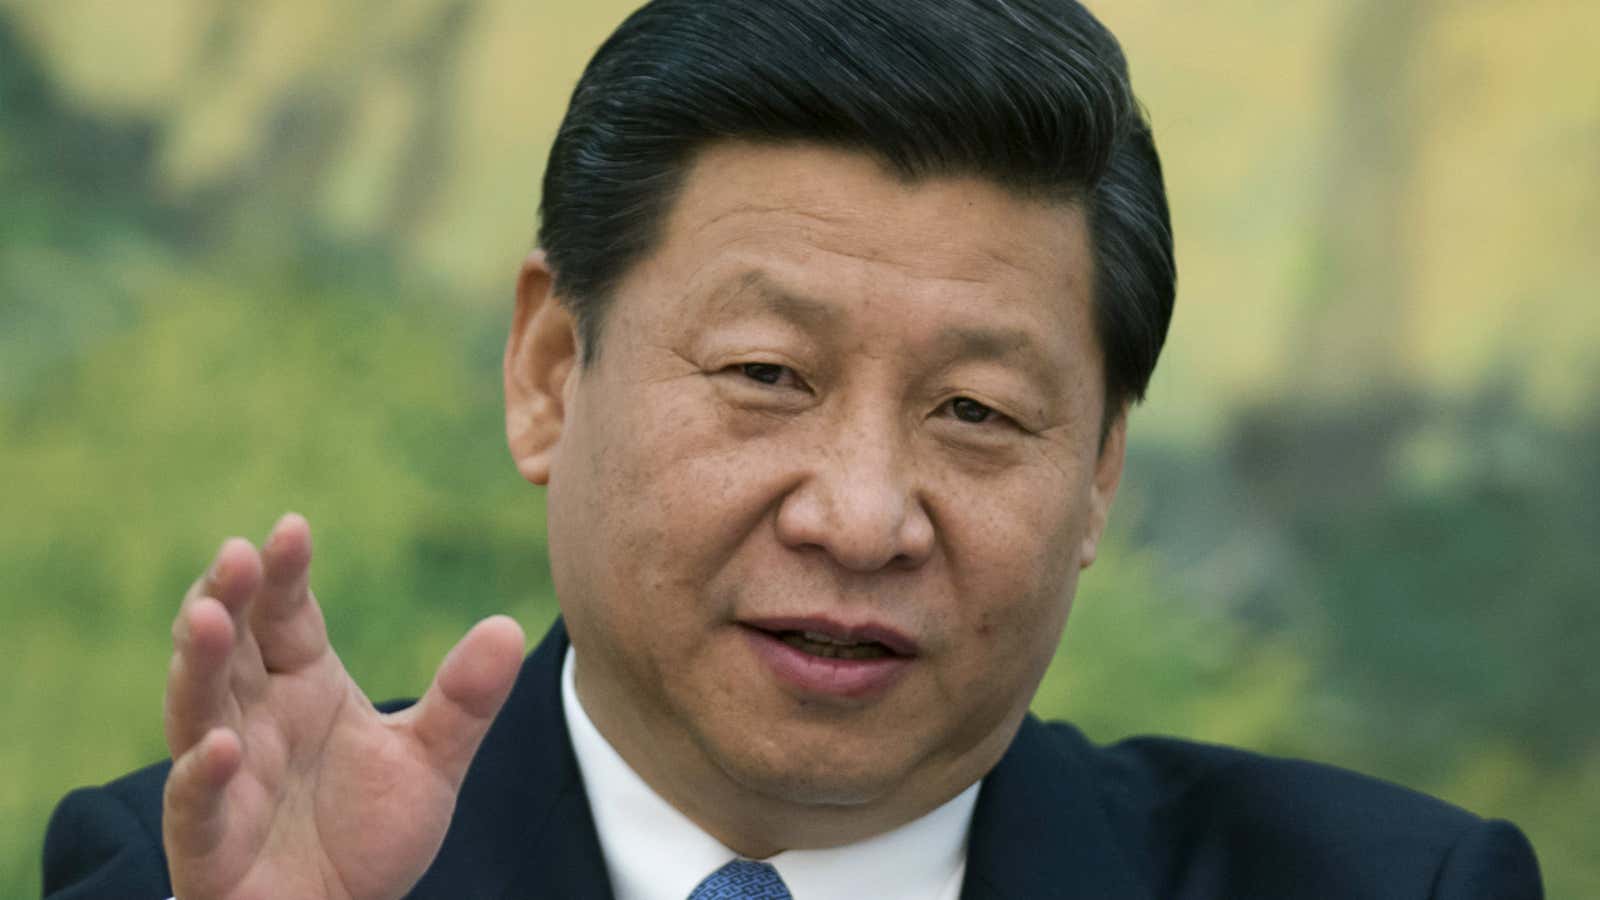 Xi Jinping during an earlier visit to Germany.